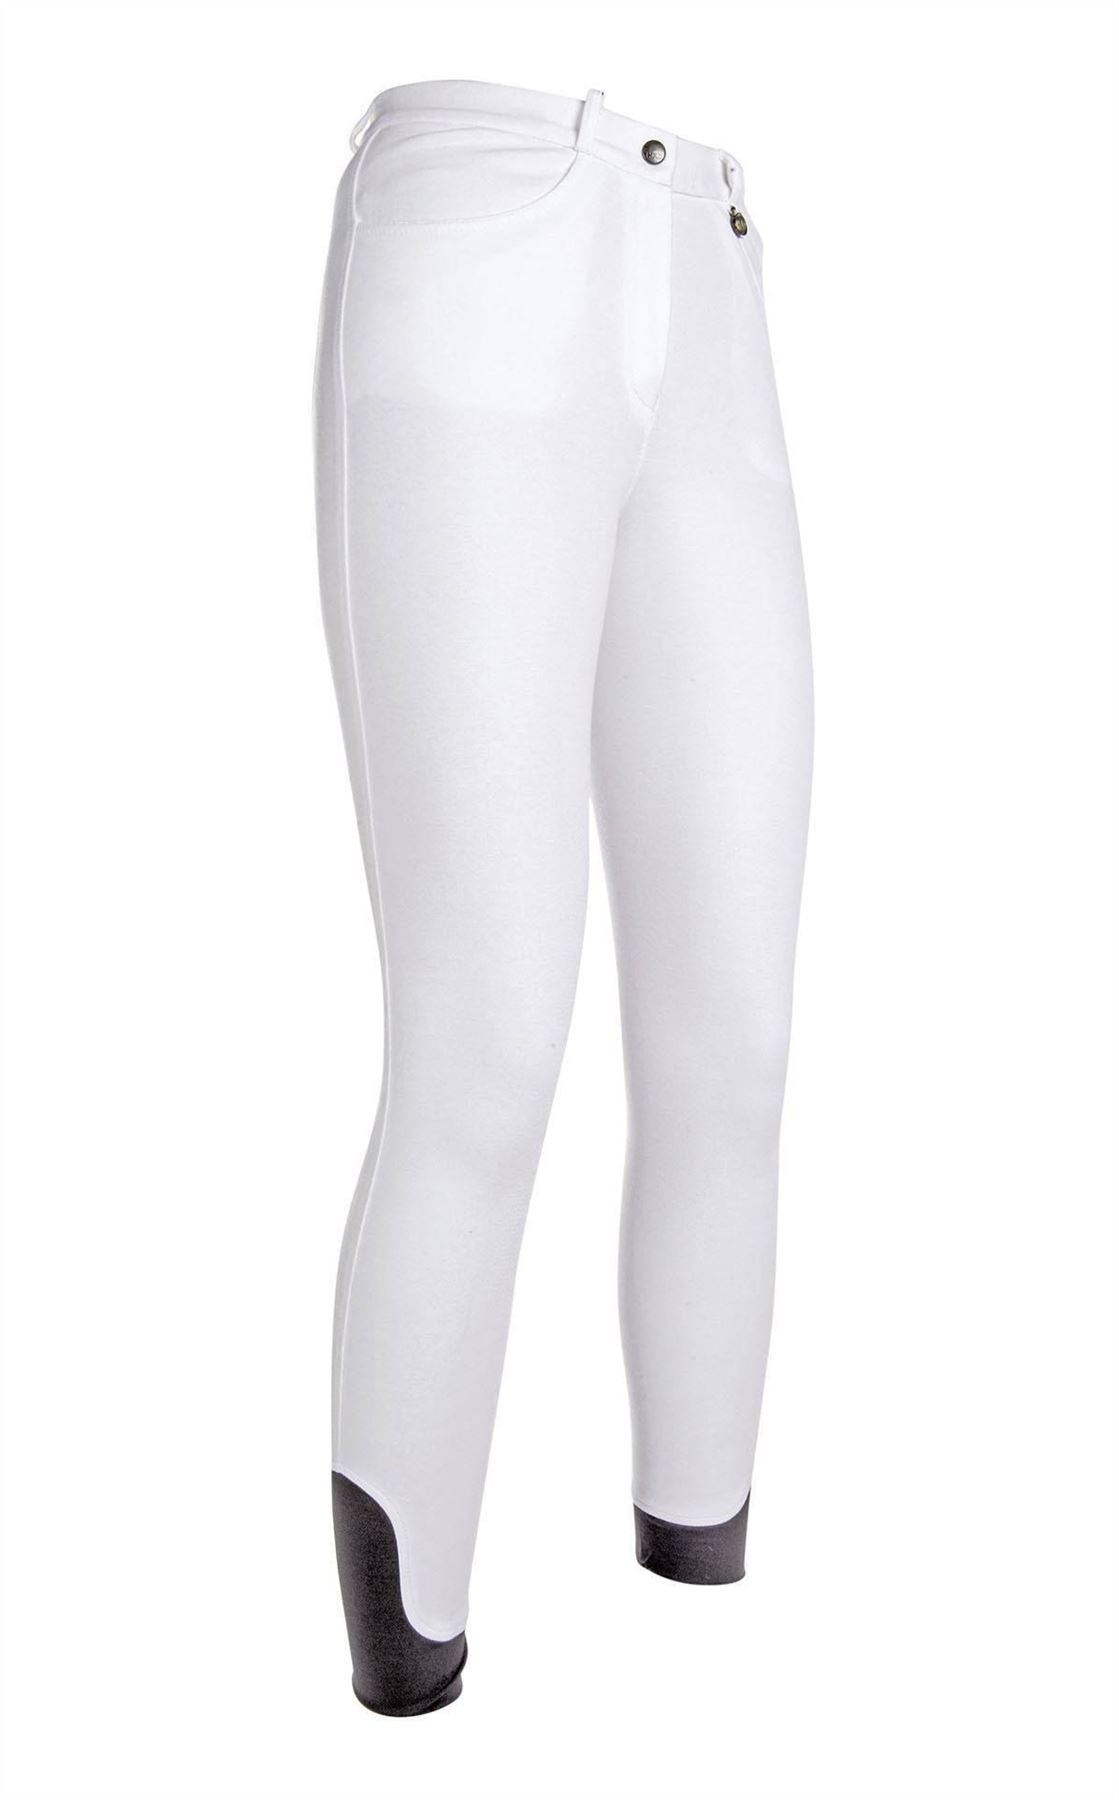 HKM Riding Breeches Kate Silicone Knee Patch - Just Horse Riders